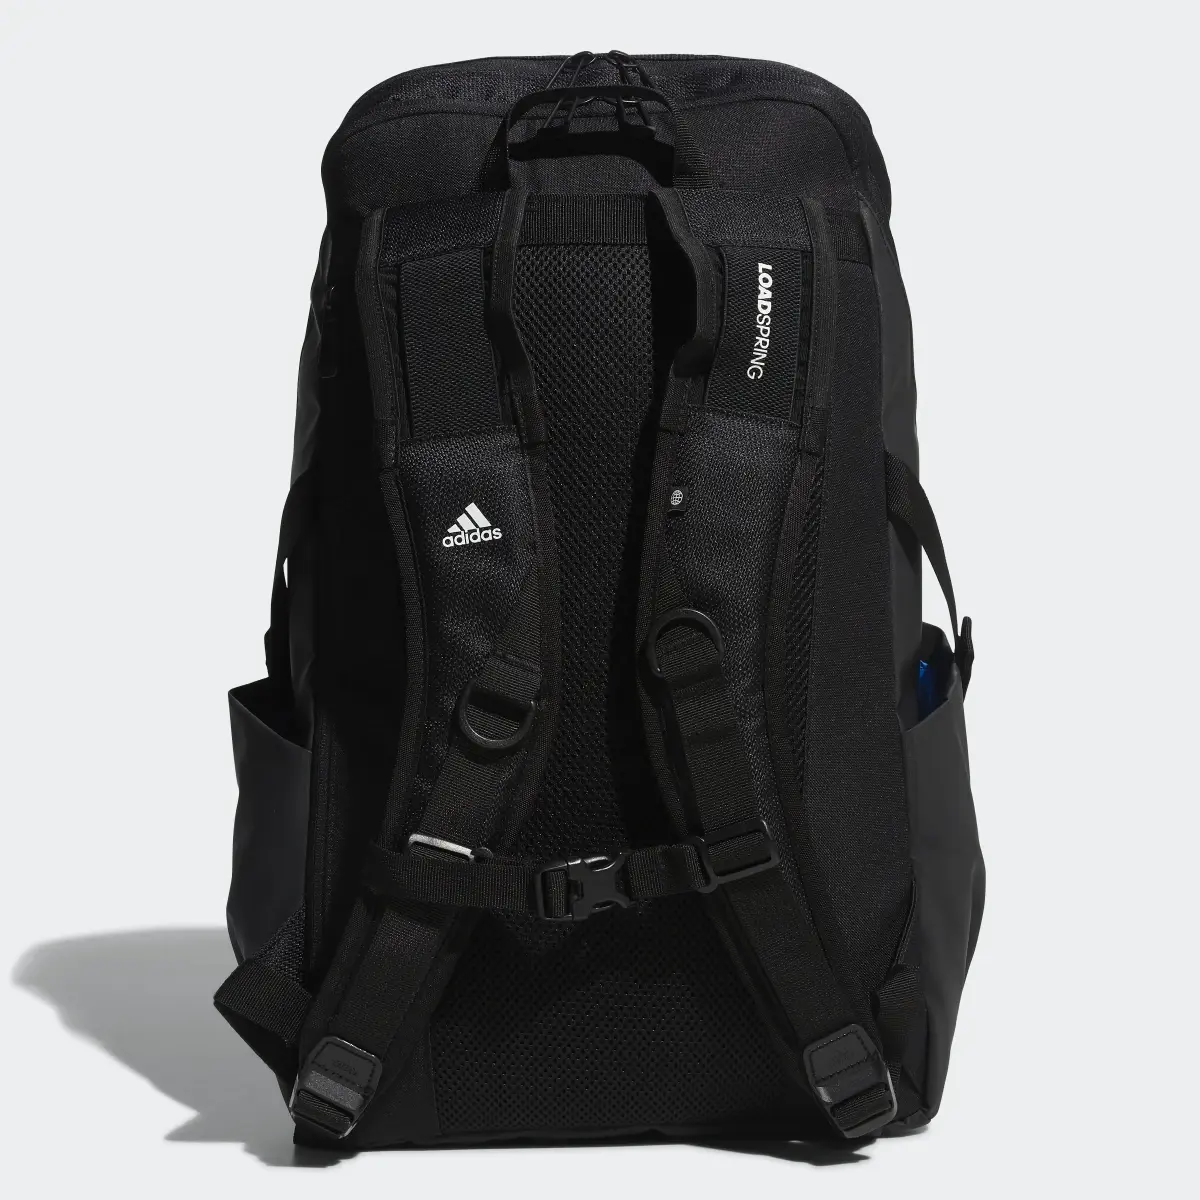 Adidas Endurance Packing System Backpack. 3